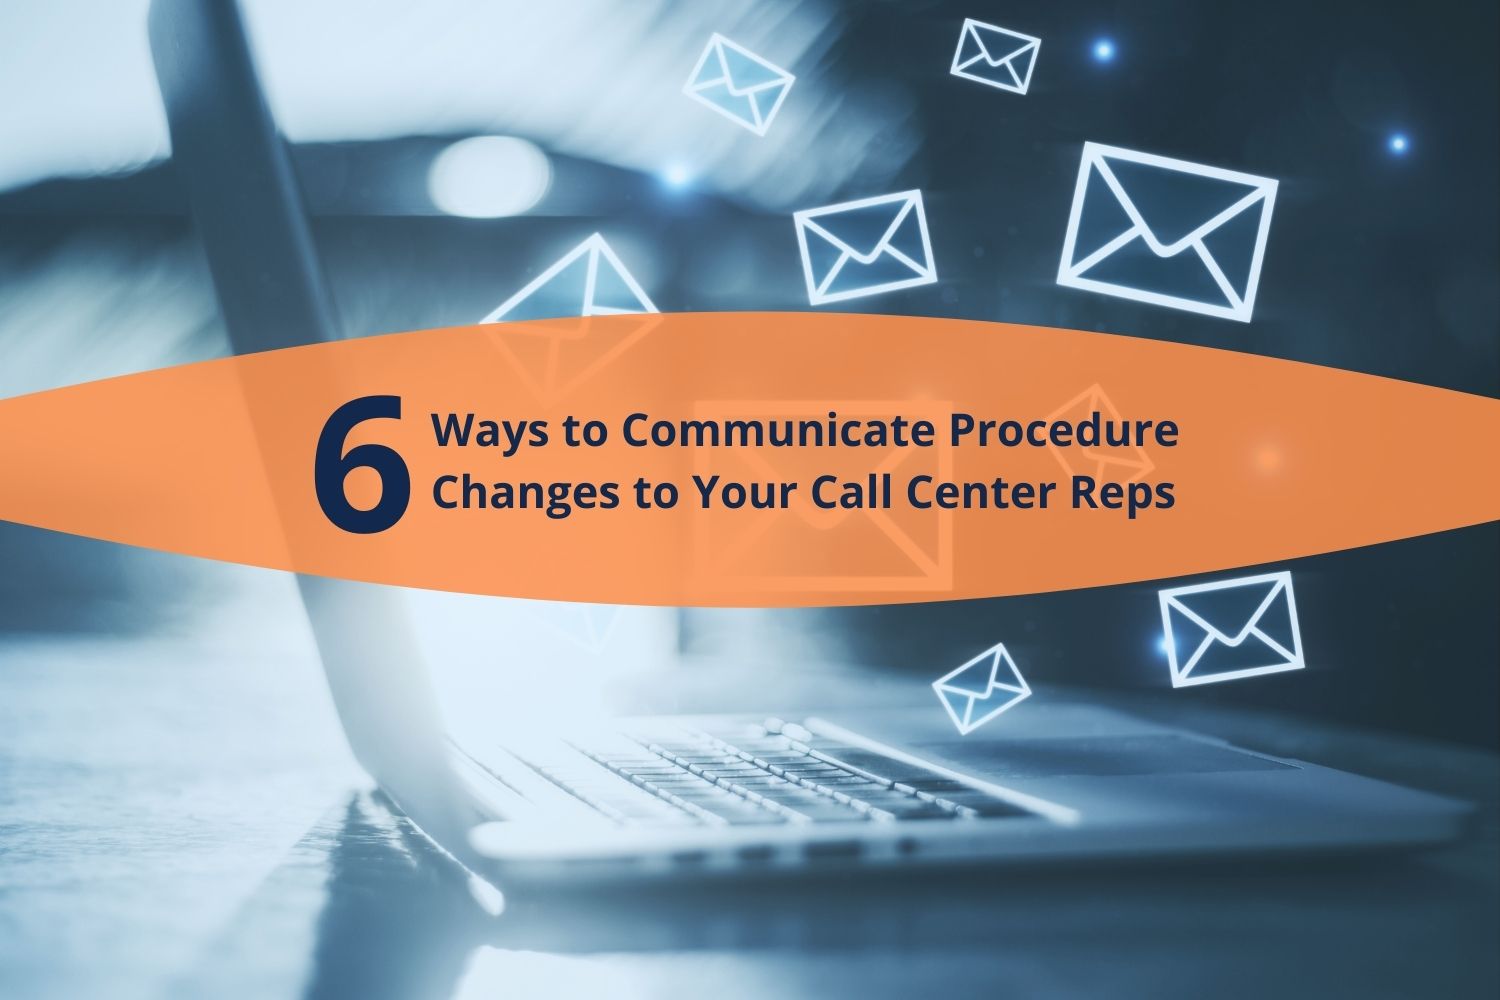 6 Ways to Communicate Procedure Changes to Your Call Center Reps